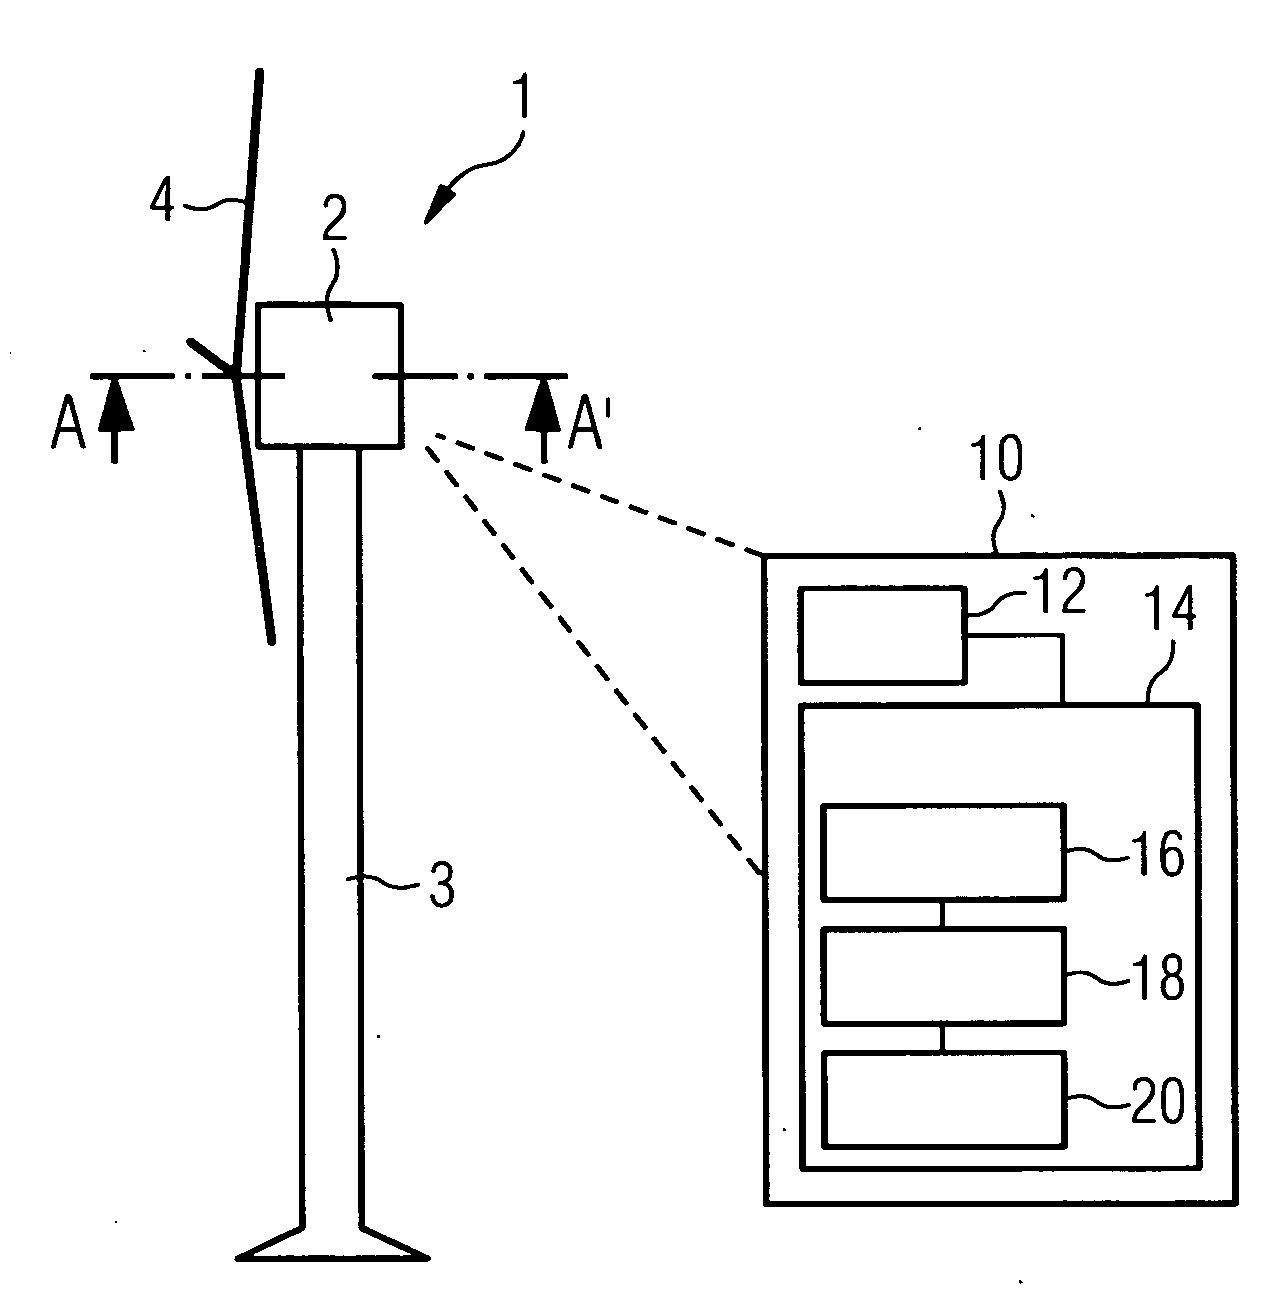 Apparatus and method for determining a resonant frequency of a wind turbine tower